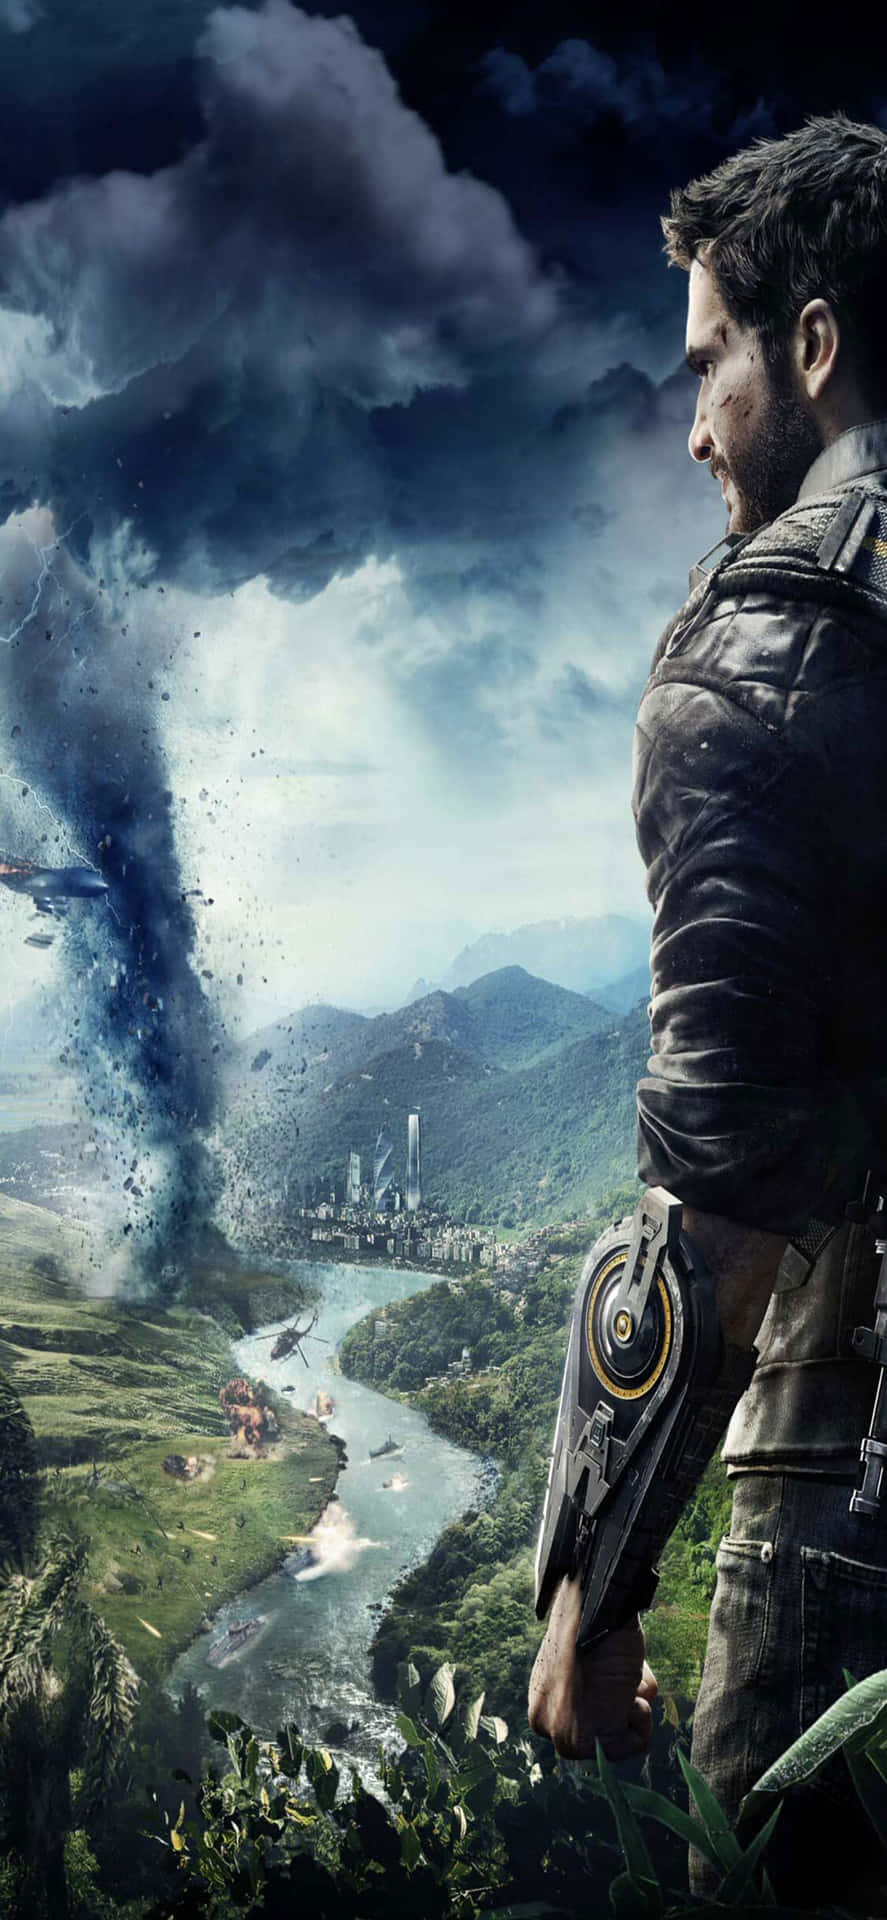 Explore the Open-World Paradise of Just Cause 4 with the Iphone X